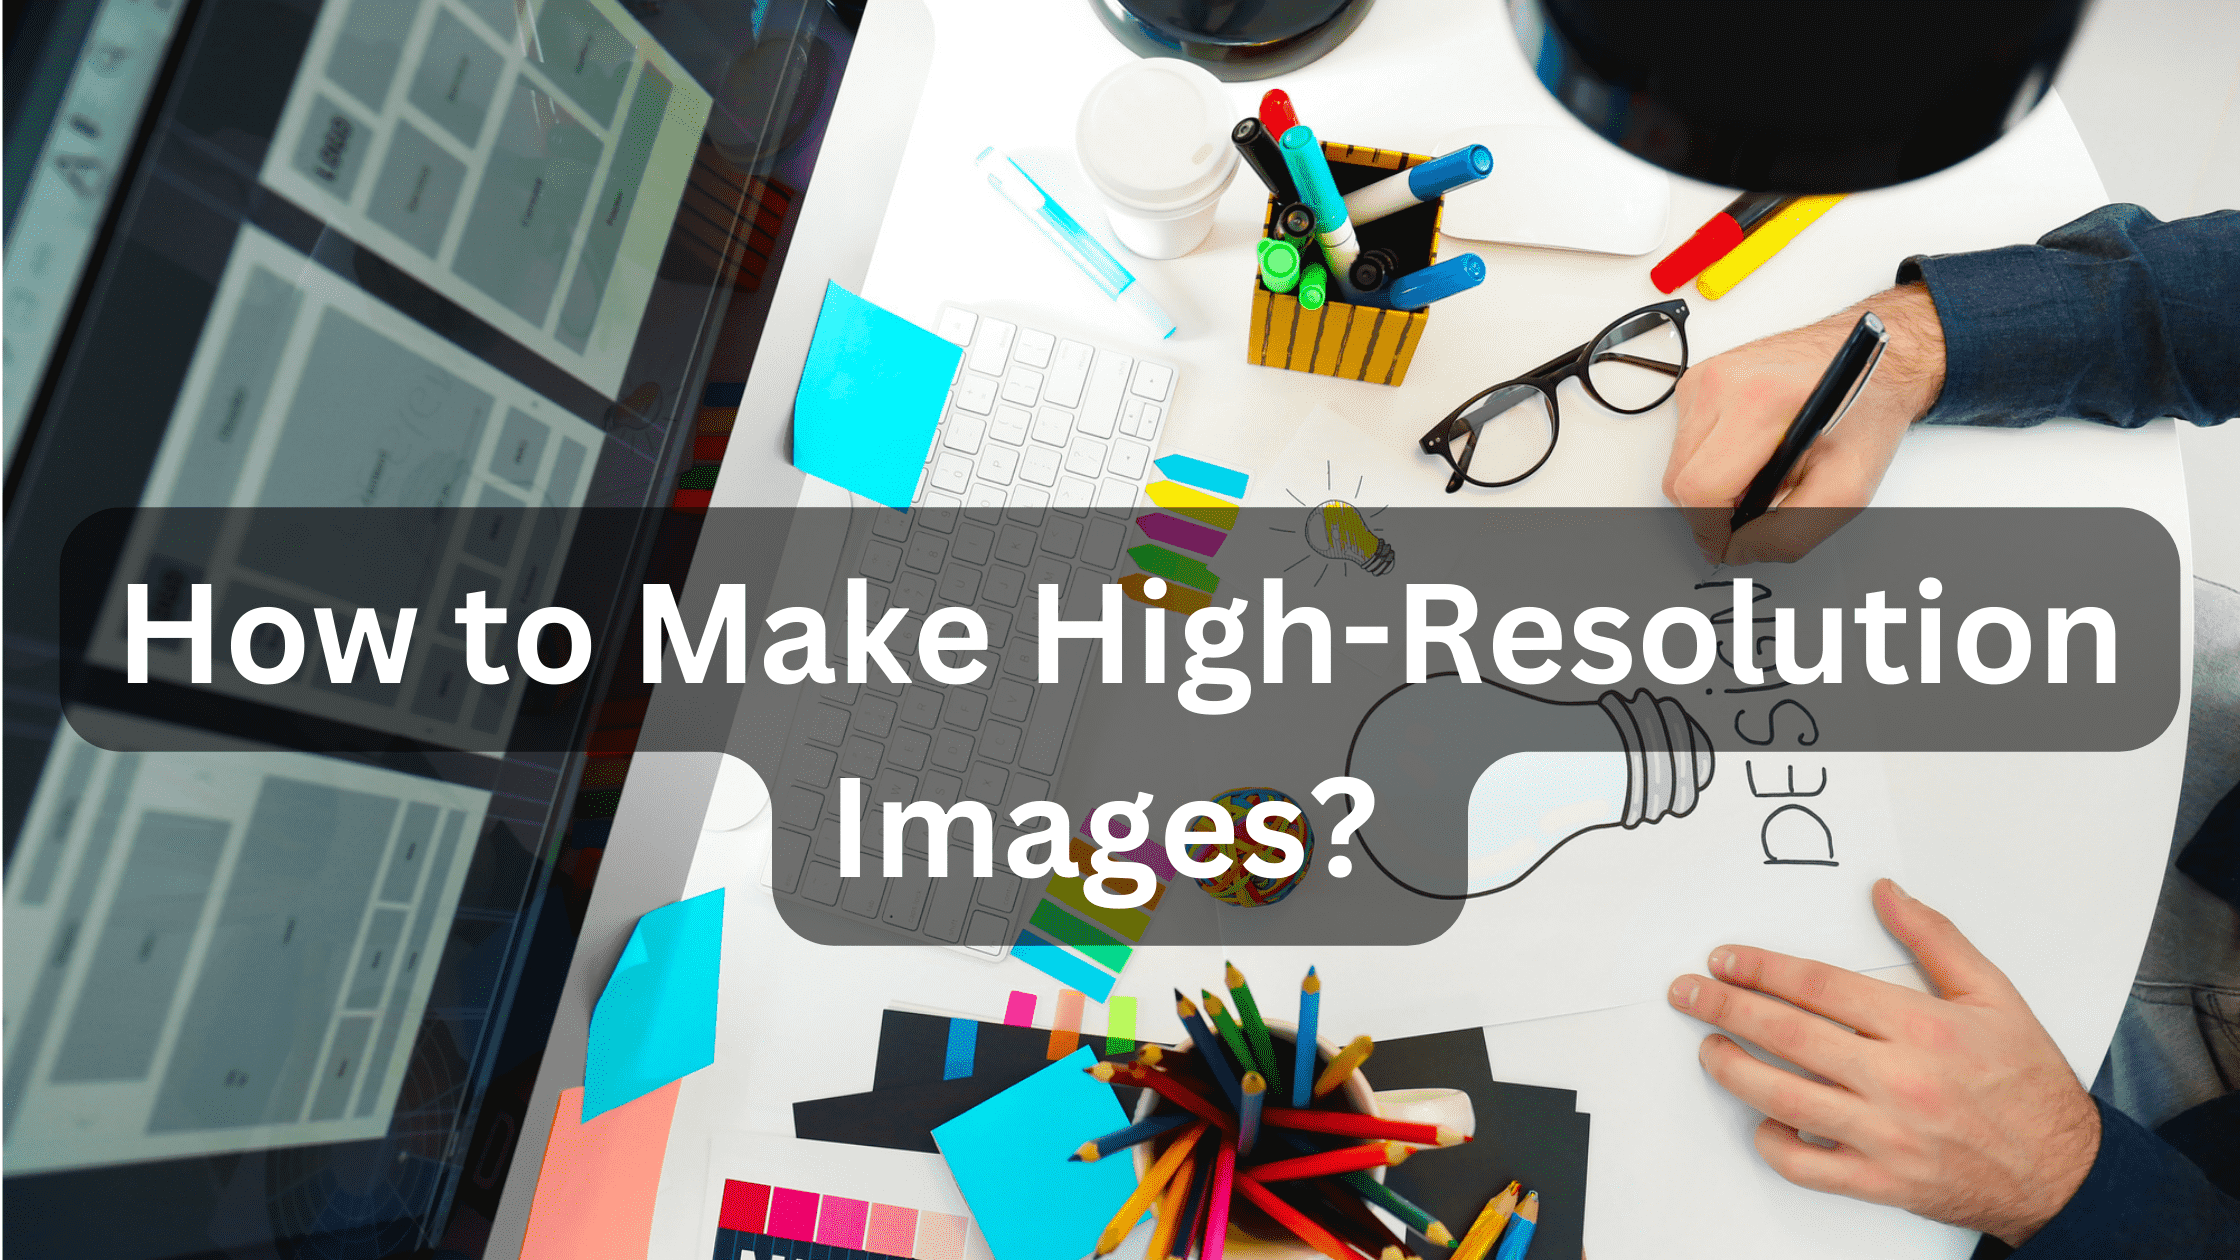 How to Make High-Resolution Images?